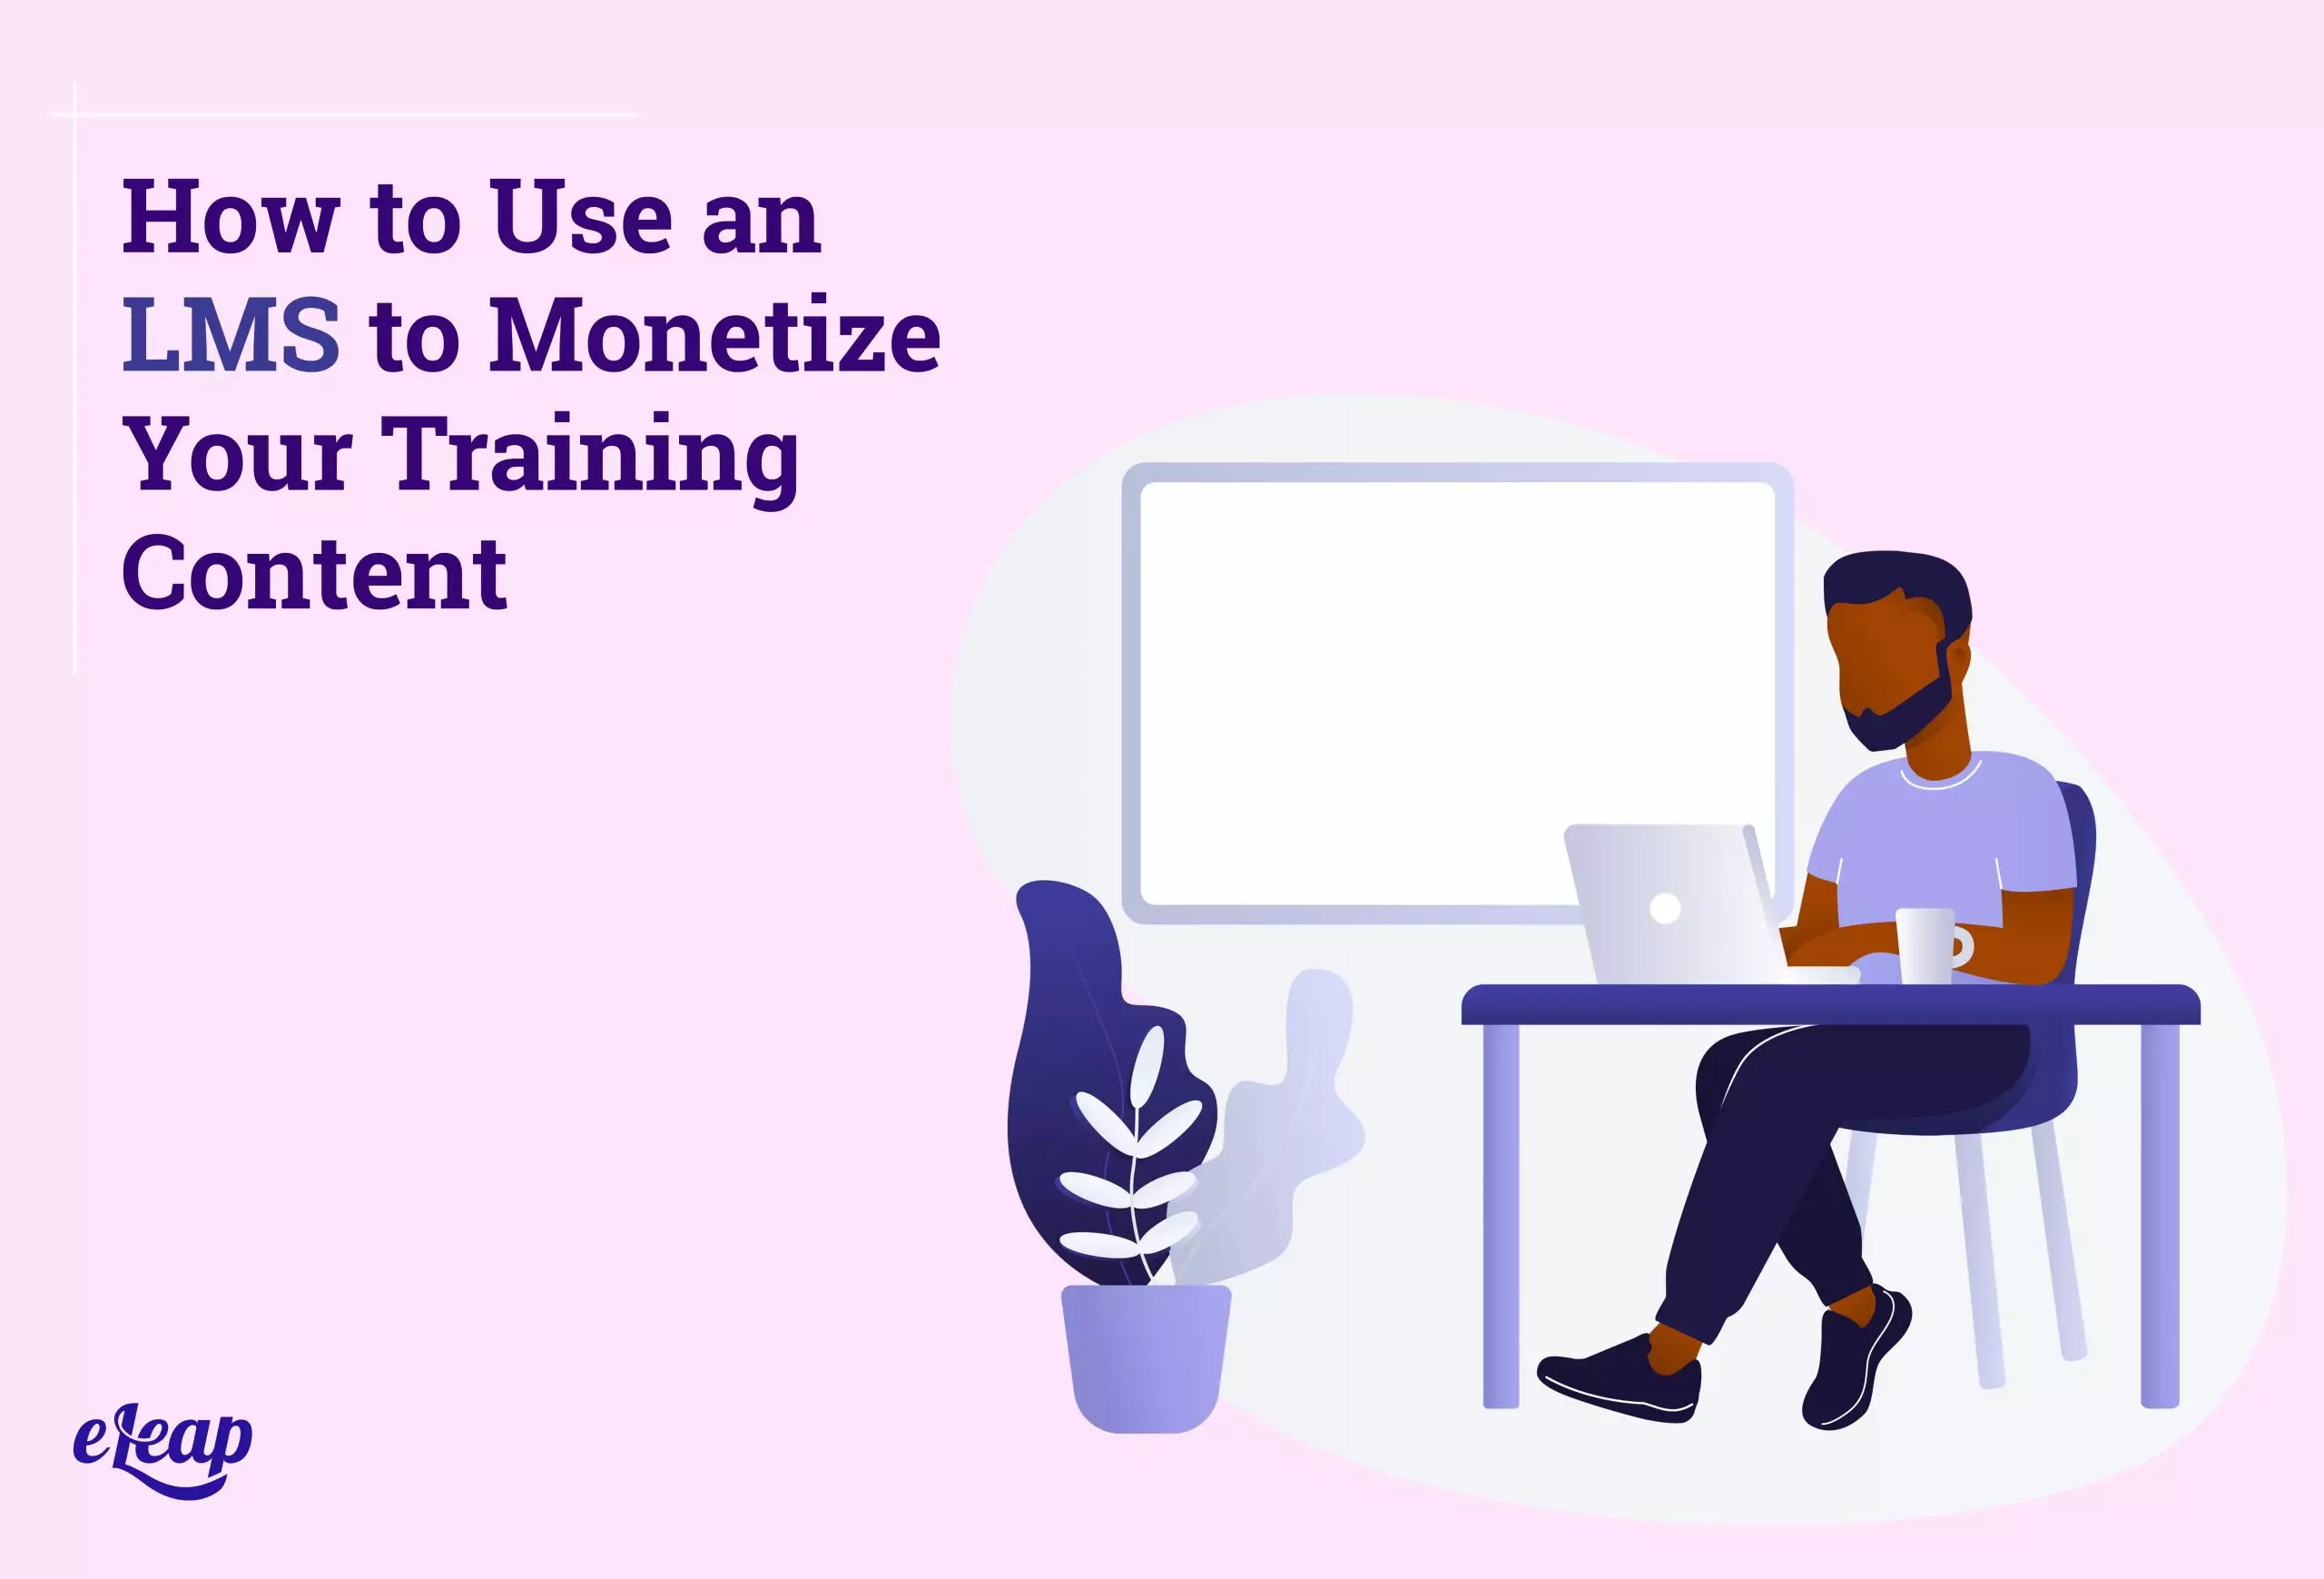 How to Use an LMS to Monetize Your Training Content